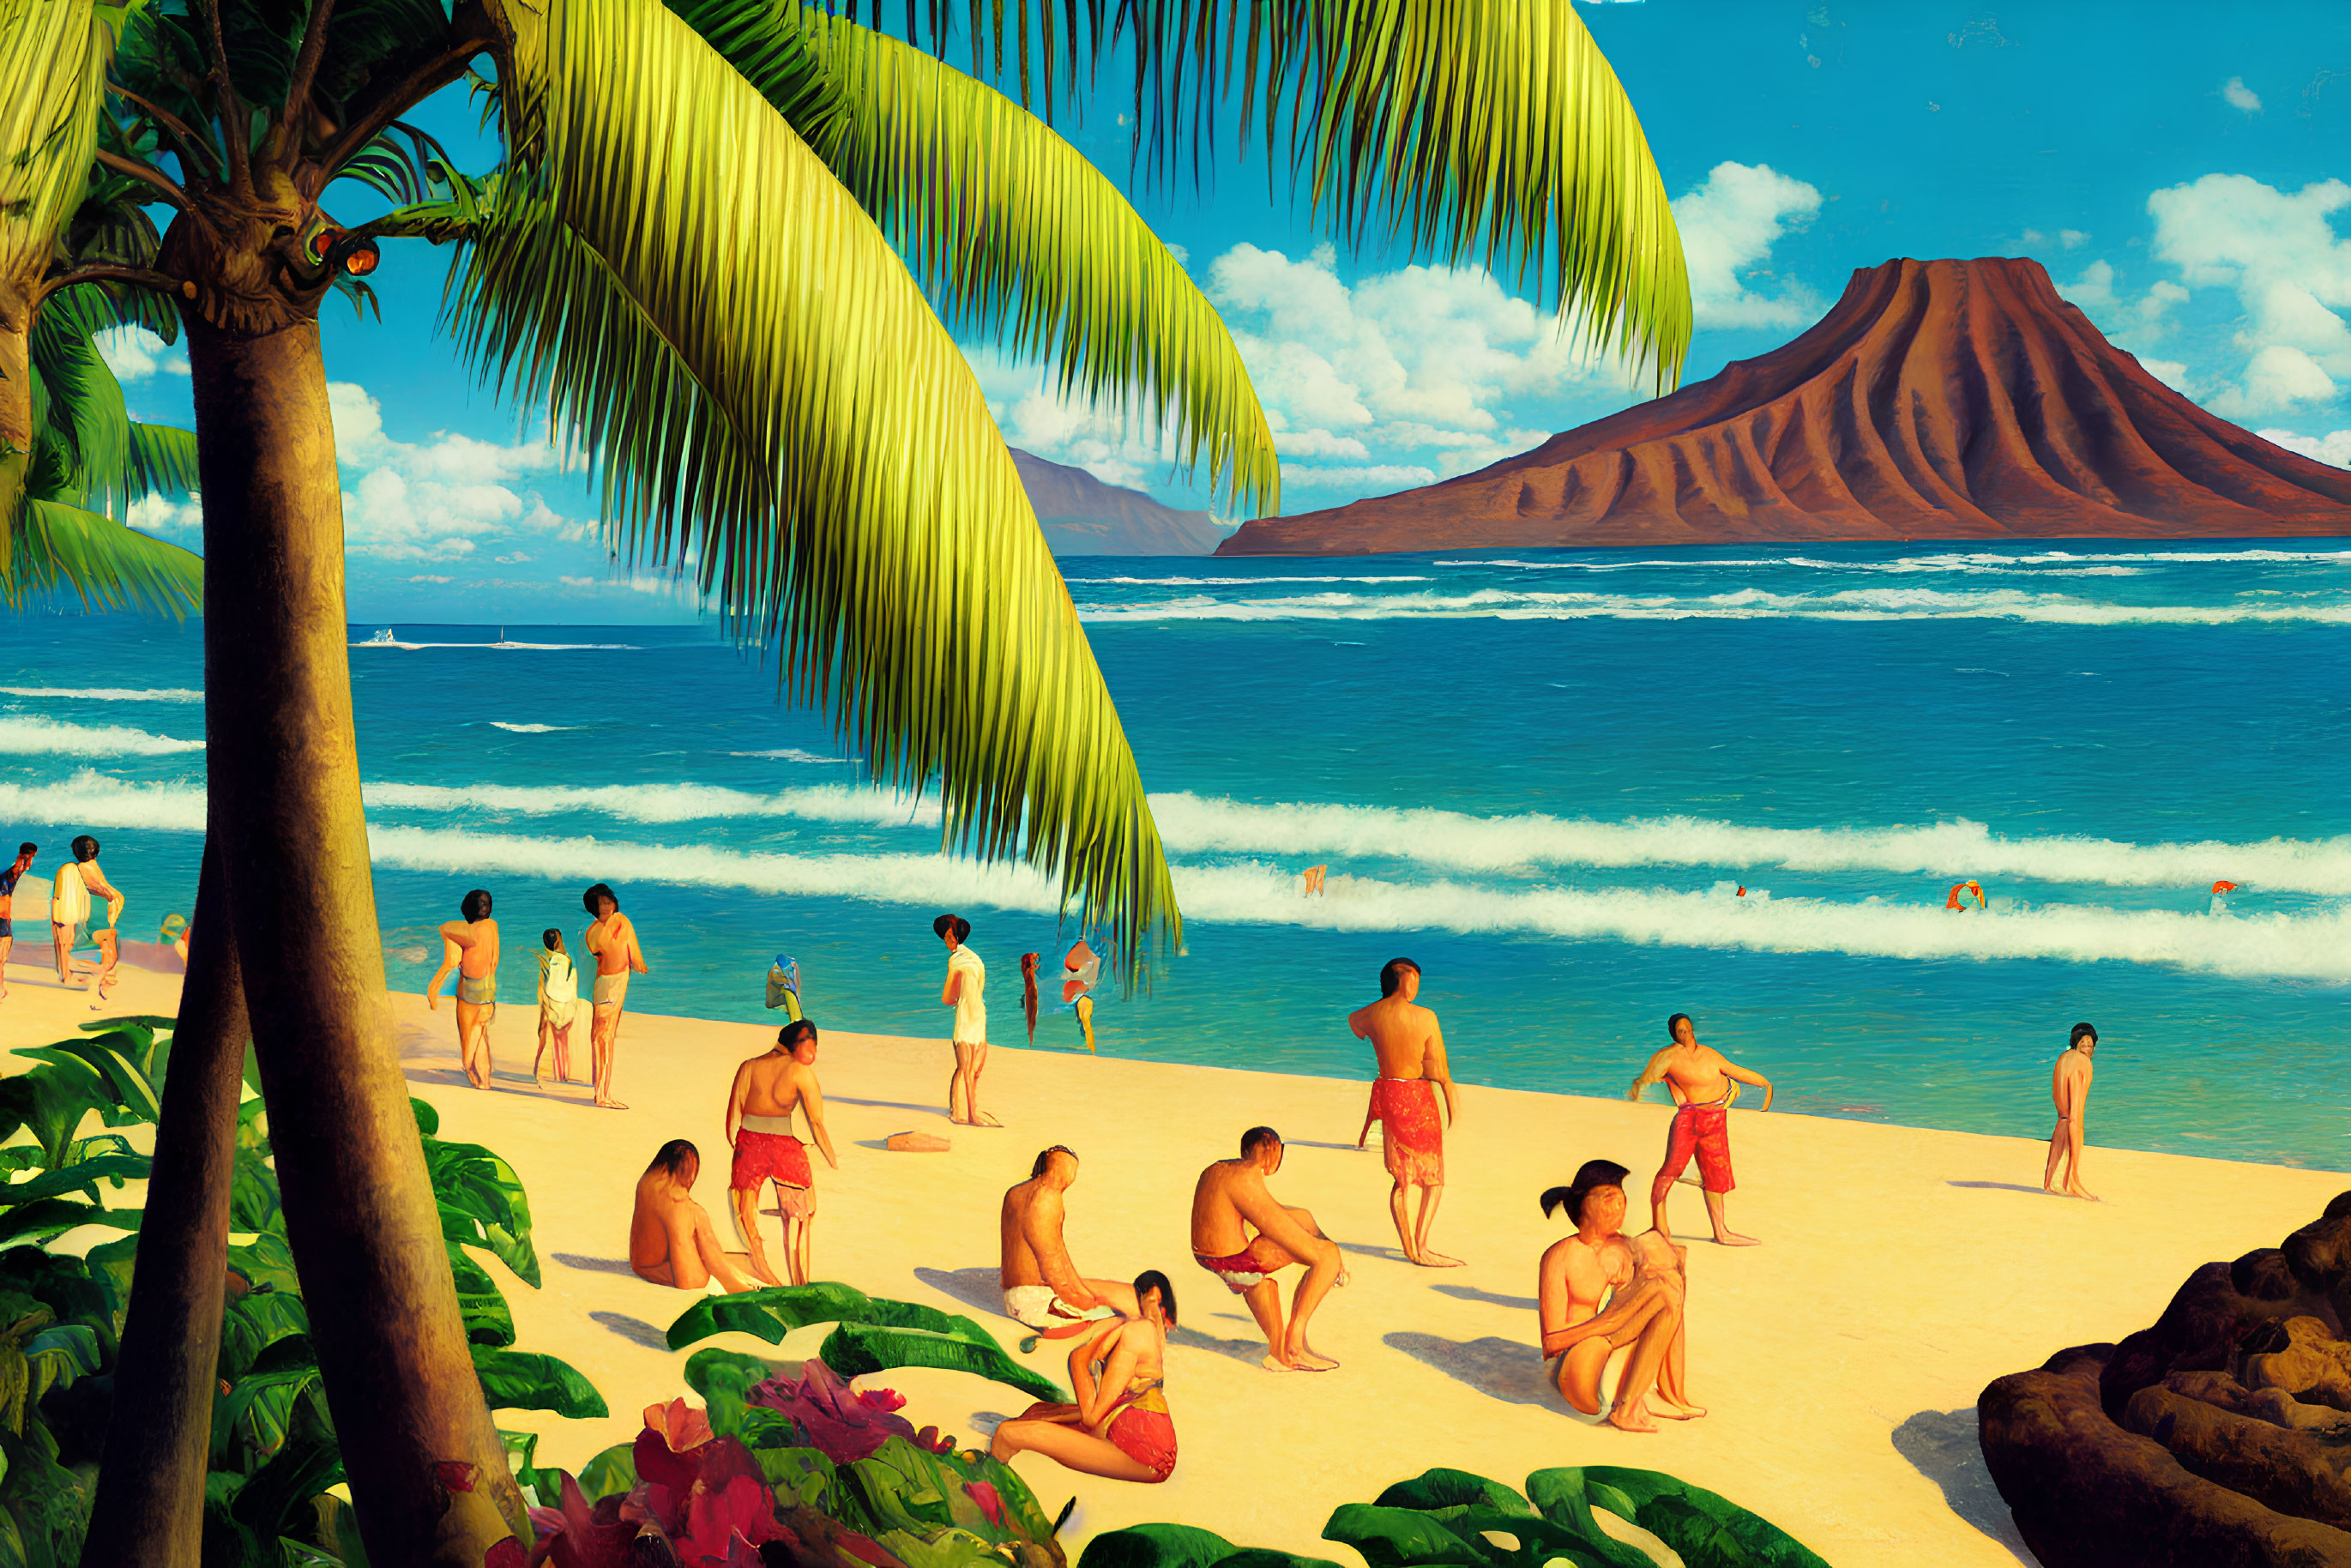 Vibrant illustration of people at tropical beach with volcano, palm trees, and ocean.